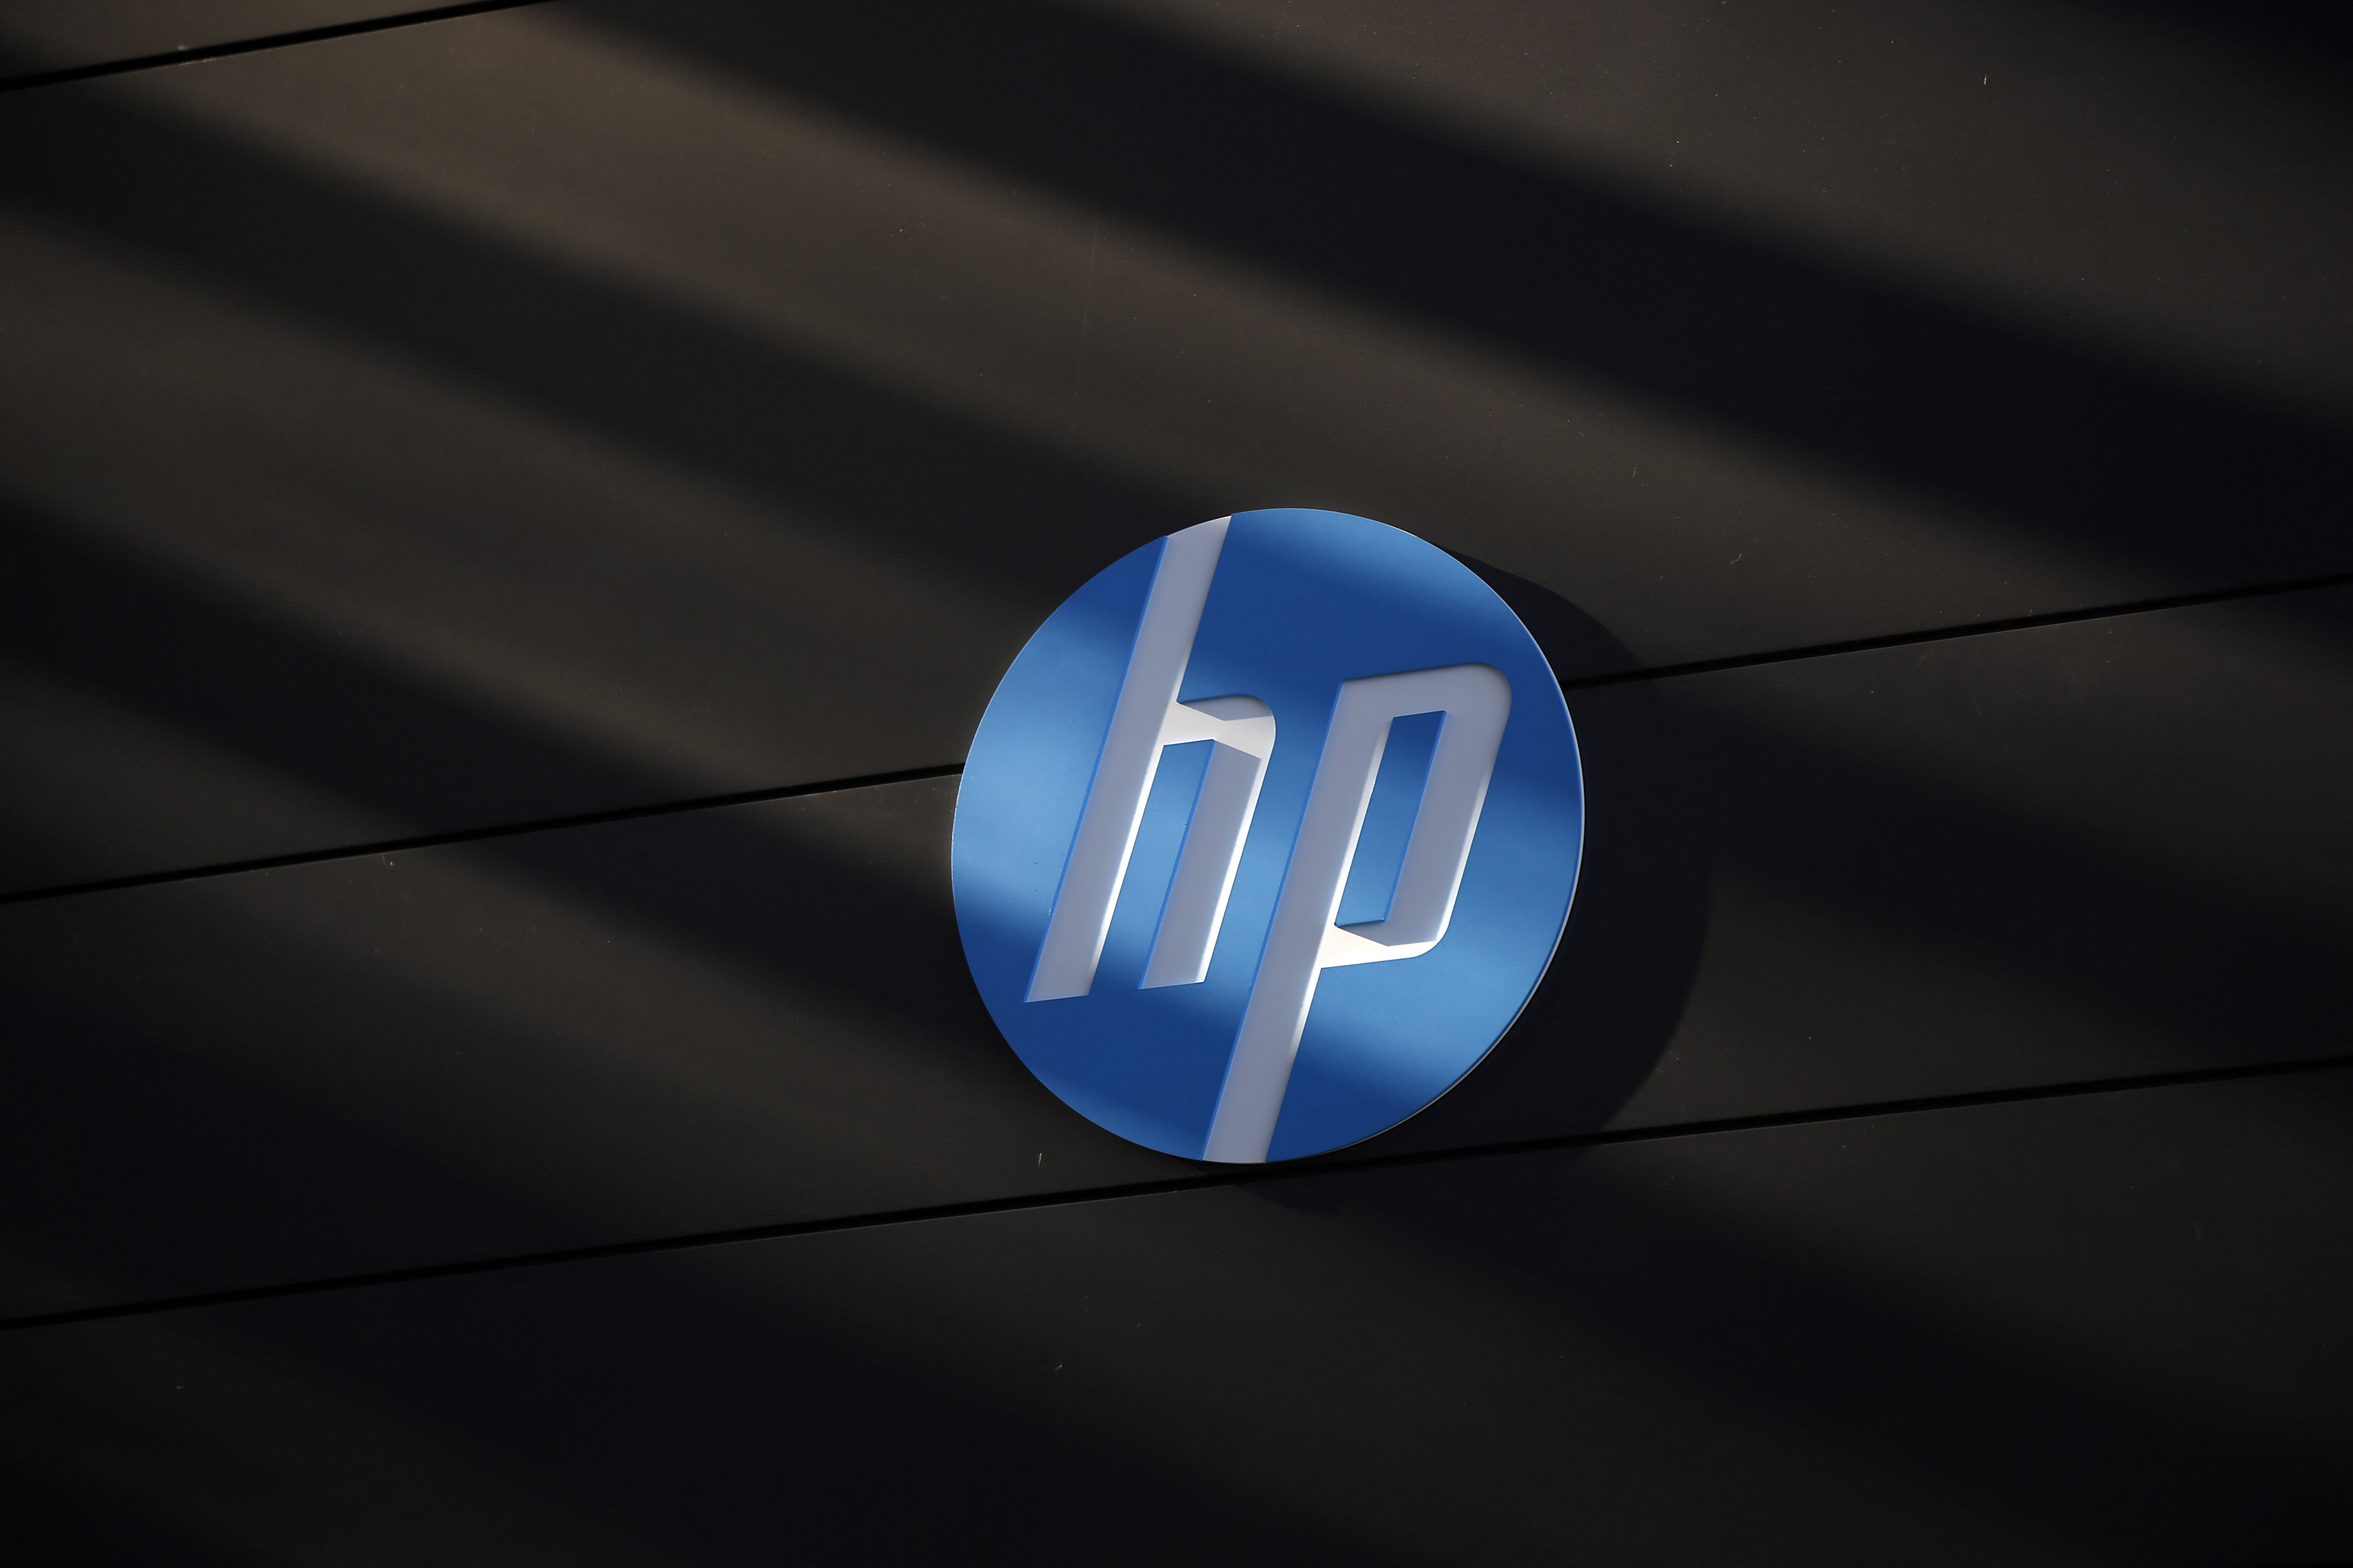 A Hewlett-Packard logo is seen at the company's Executive Briefing Center in Palo Alto